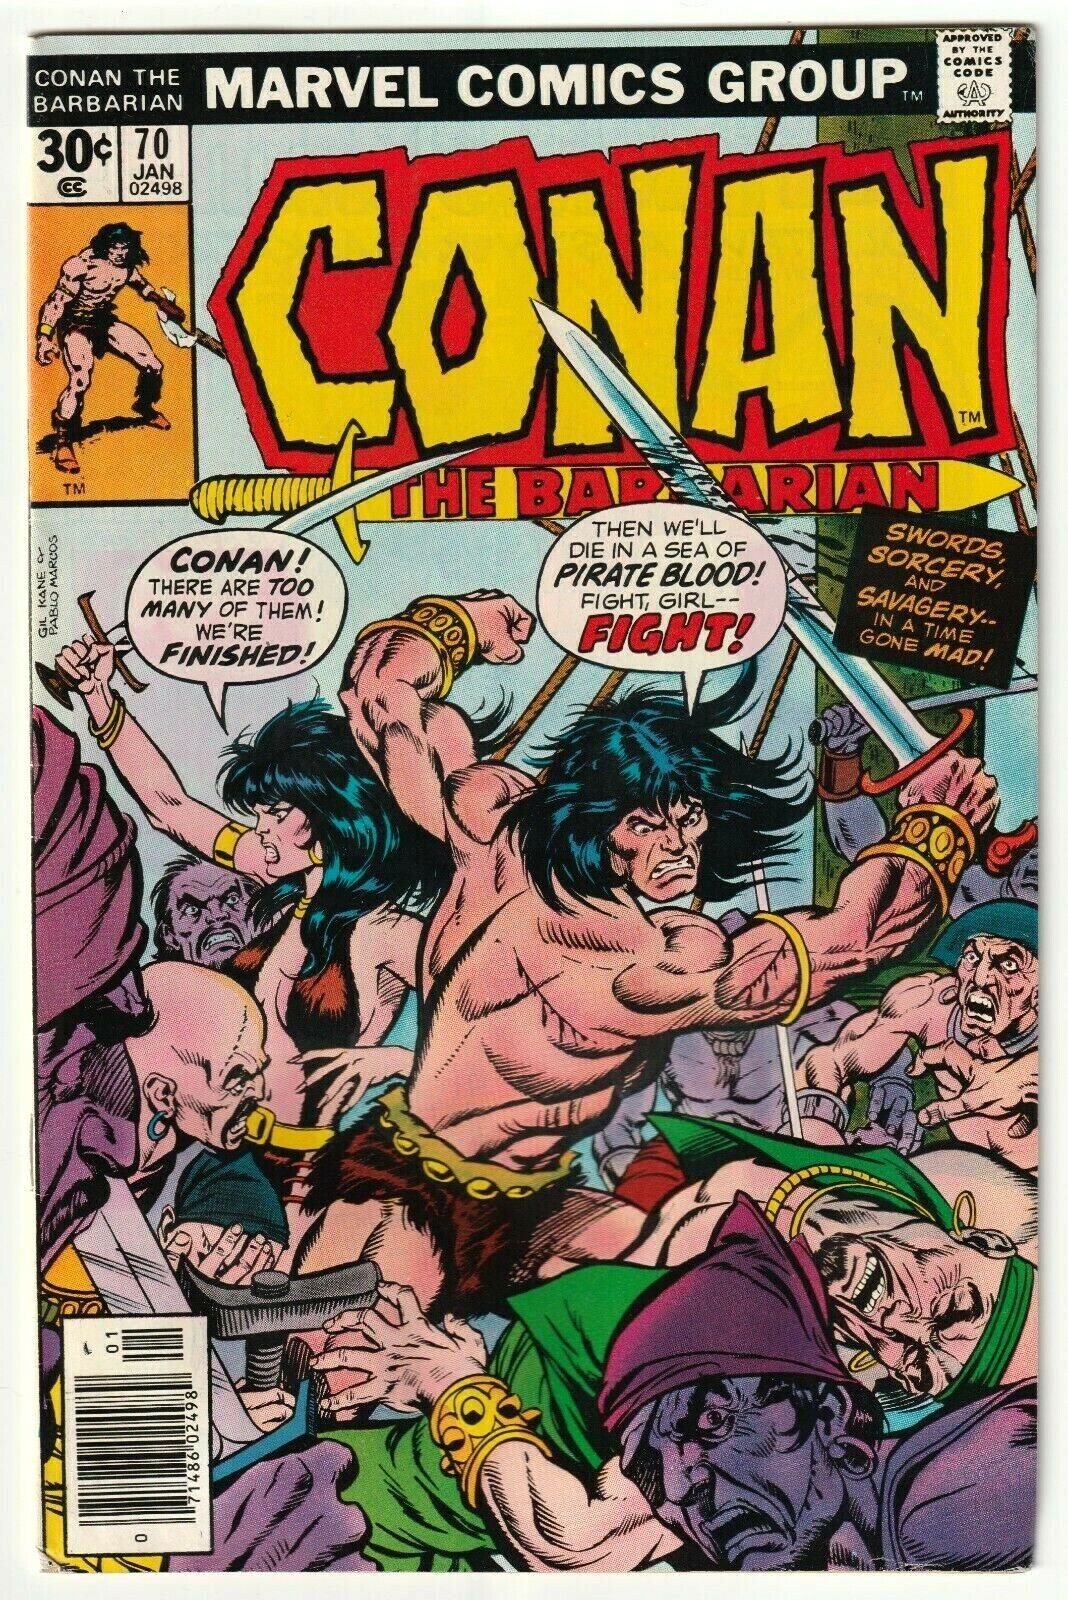 CONAN COMICS VOL 1 ISSUES #18 - #150 YOU PICK - COMPLETE YOUR RUN NEW TV SERIES